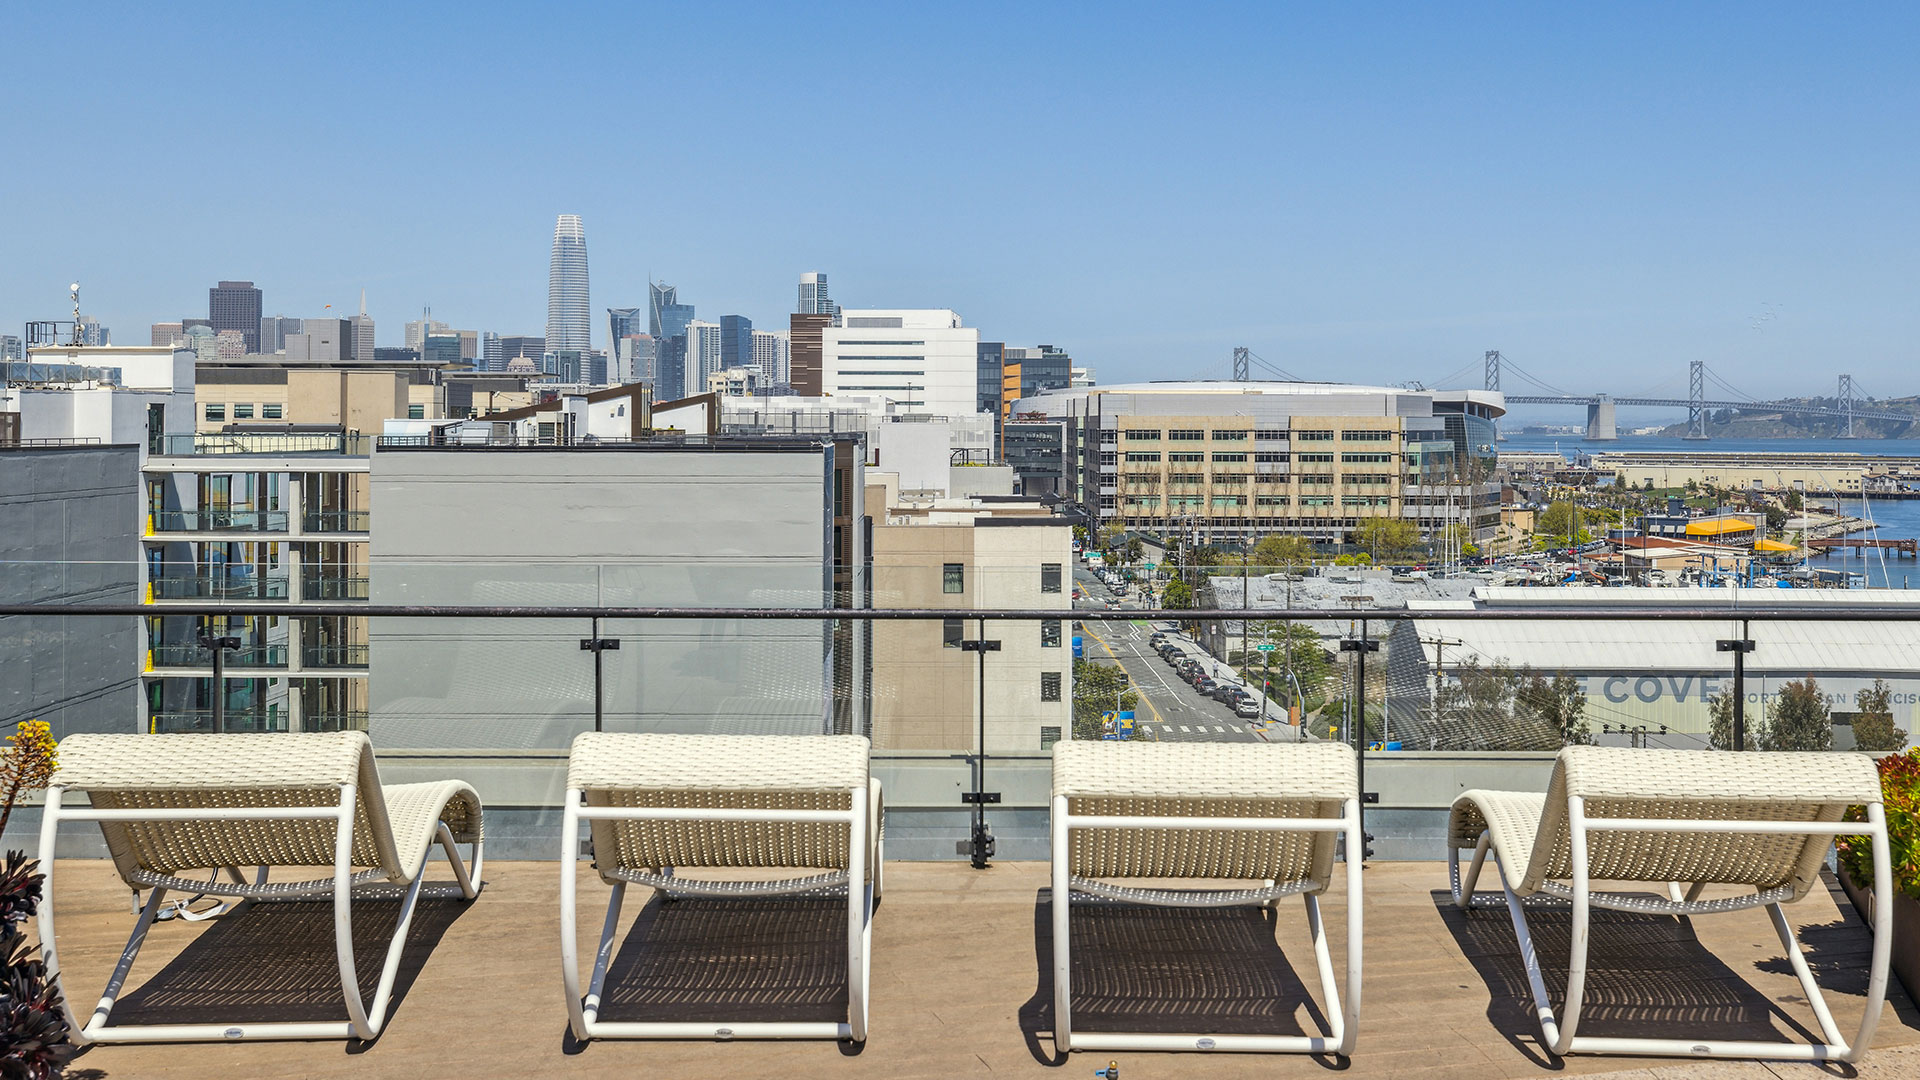 Apartments for Rent Dogpatch- Skylounge Spa With Lounge Chairs and Stunning View of San Francisco Skyline